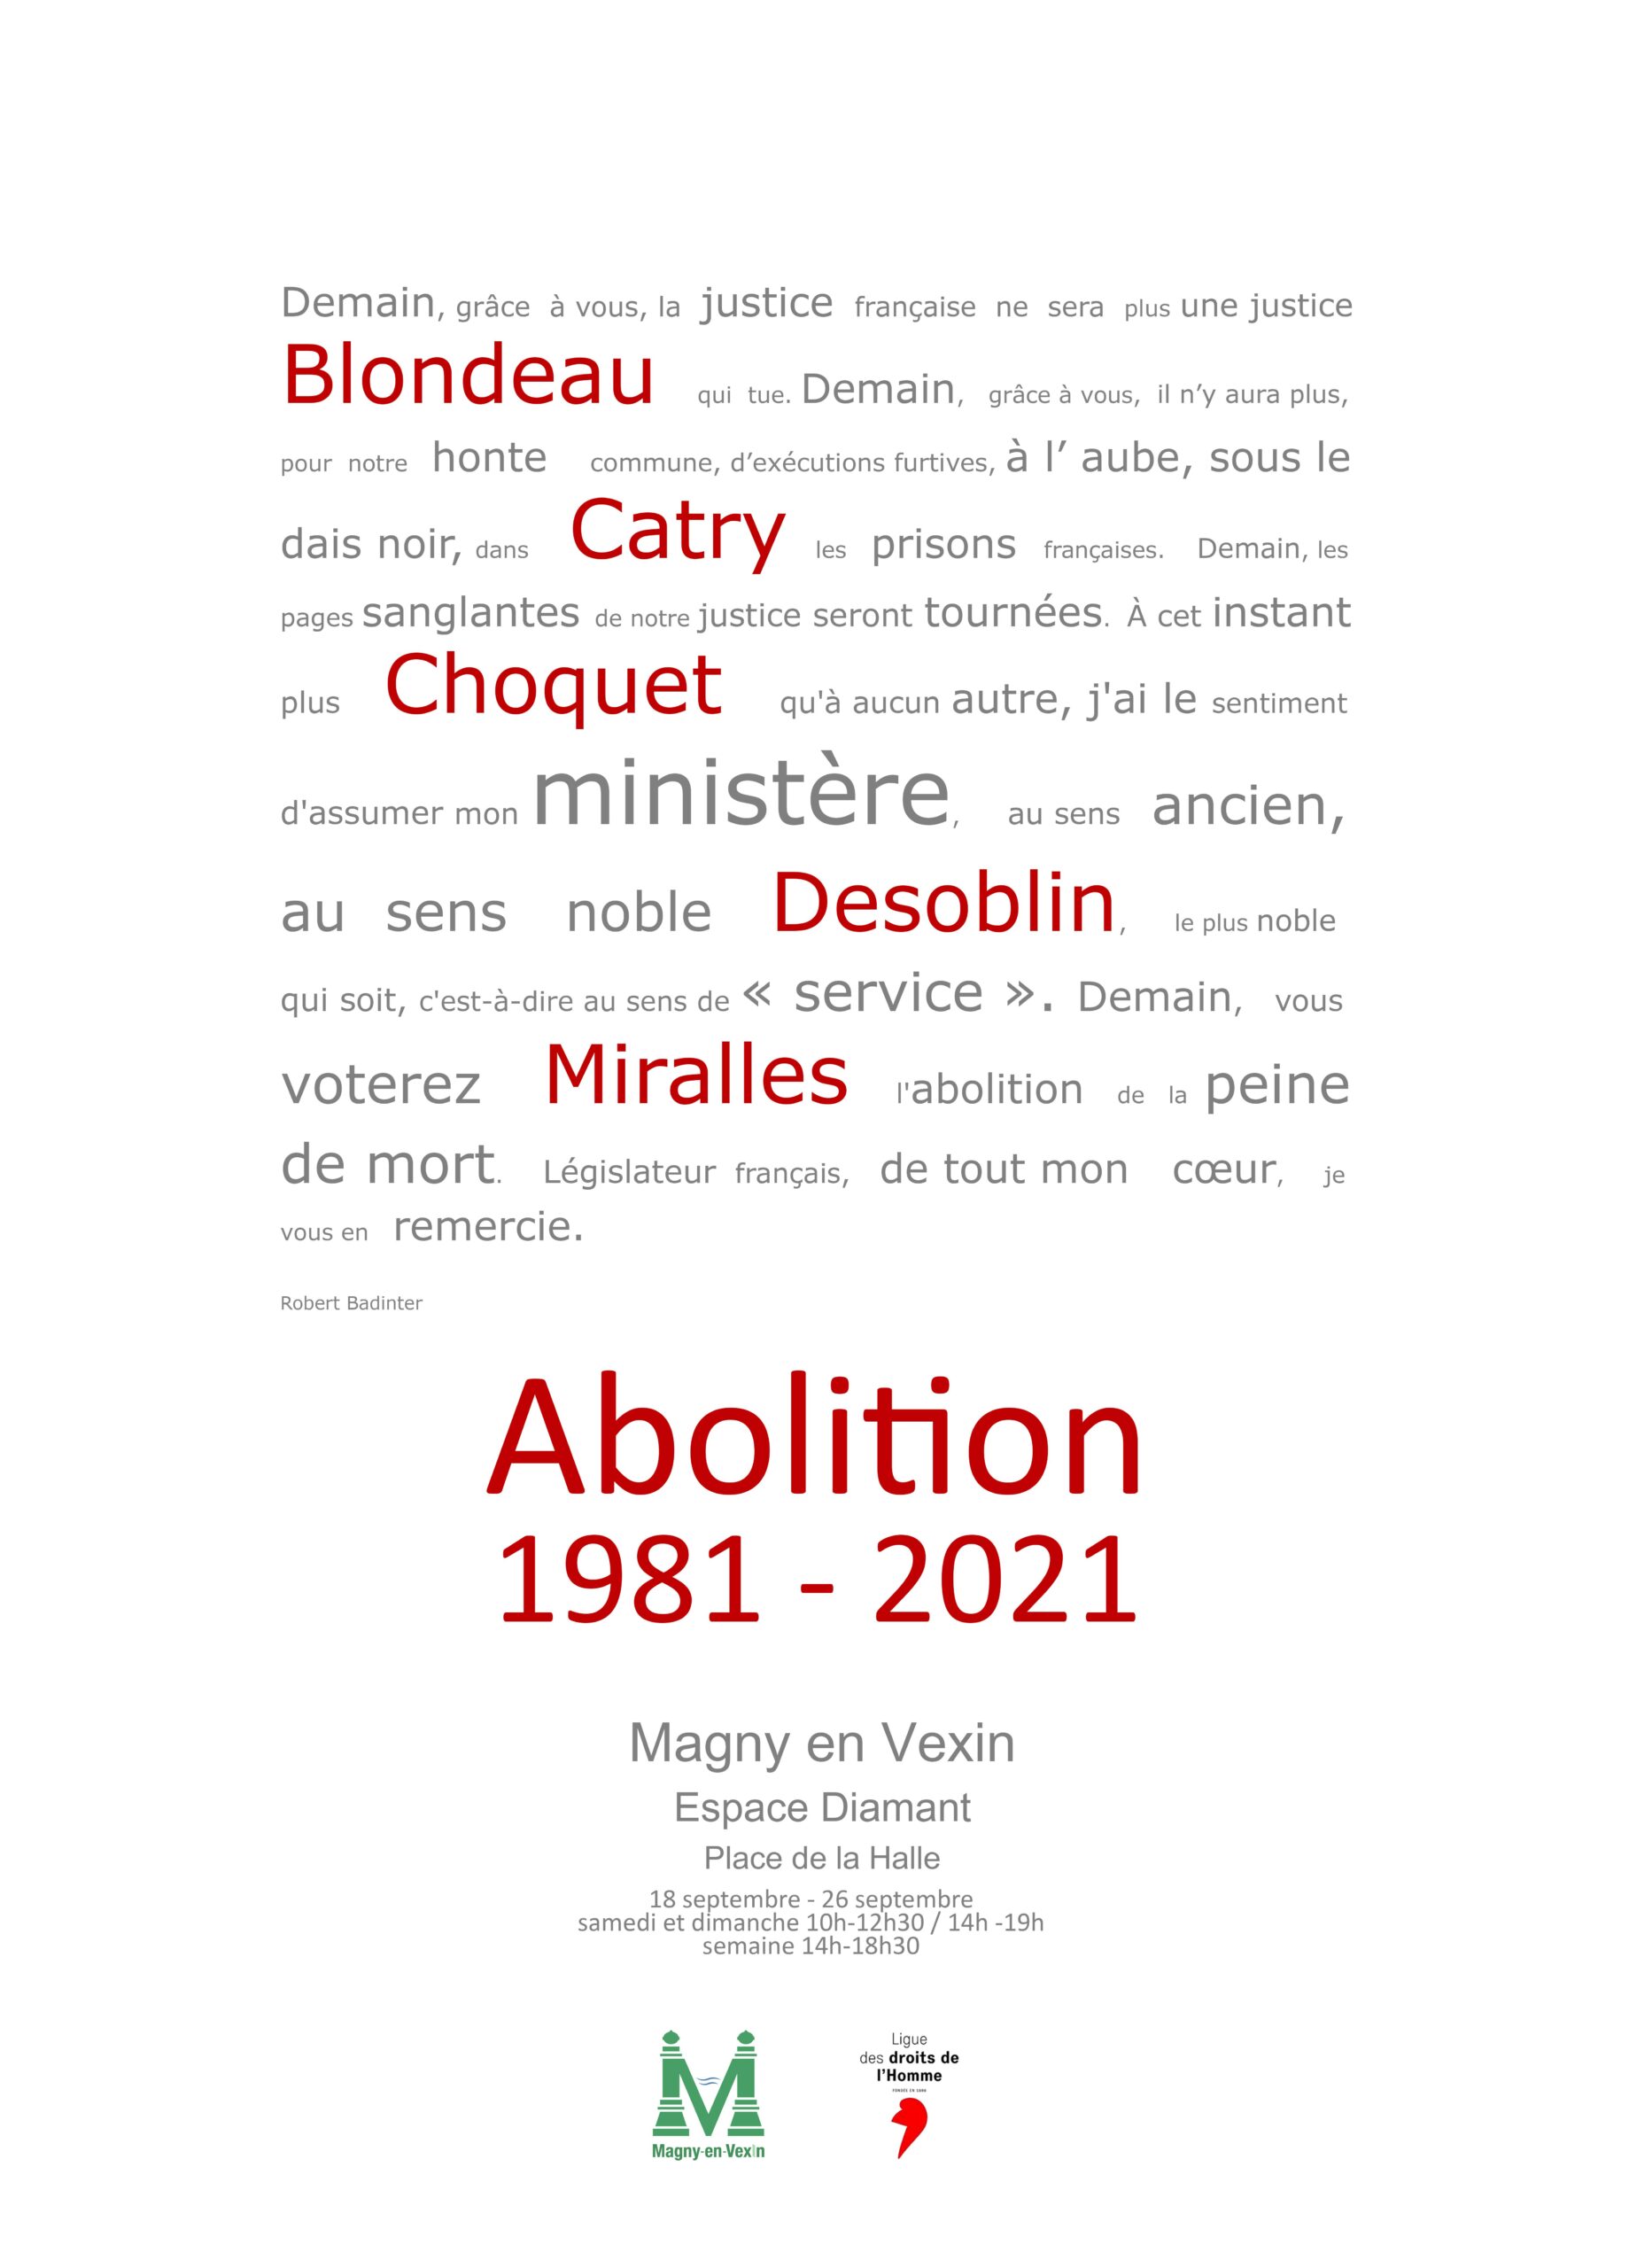 Exposition : Abolition 40 ans / 1981-2021